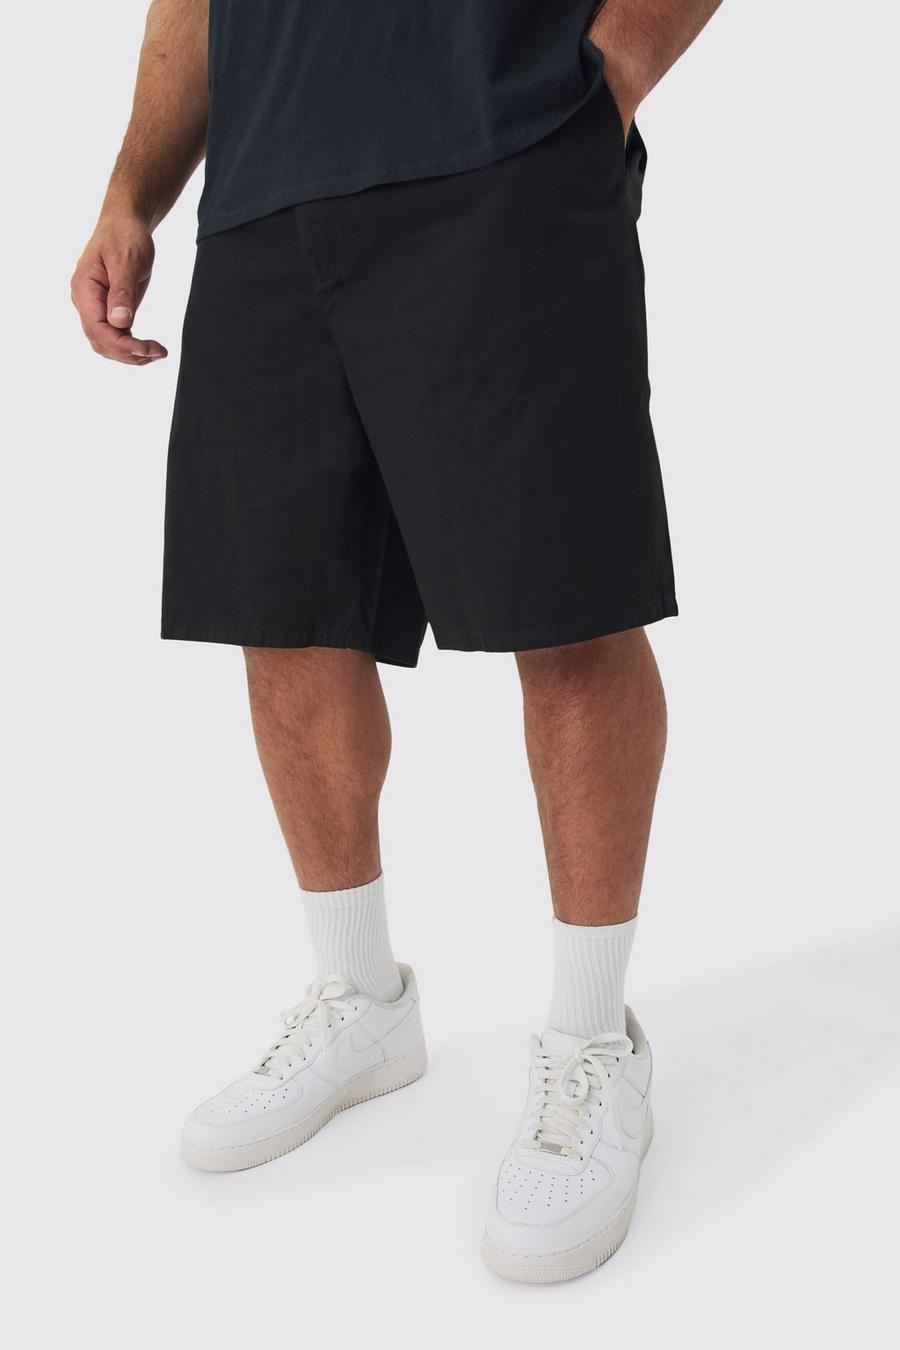 Plus Fixed Waist Black Relaxed Fit Shorts